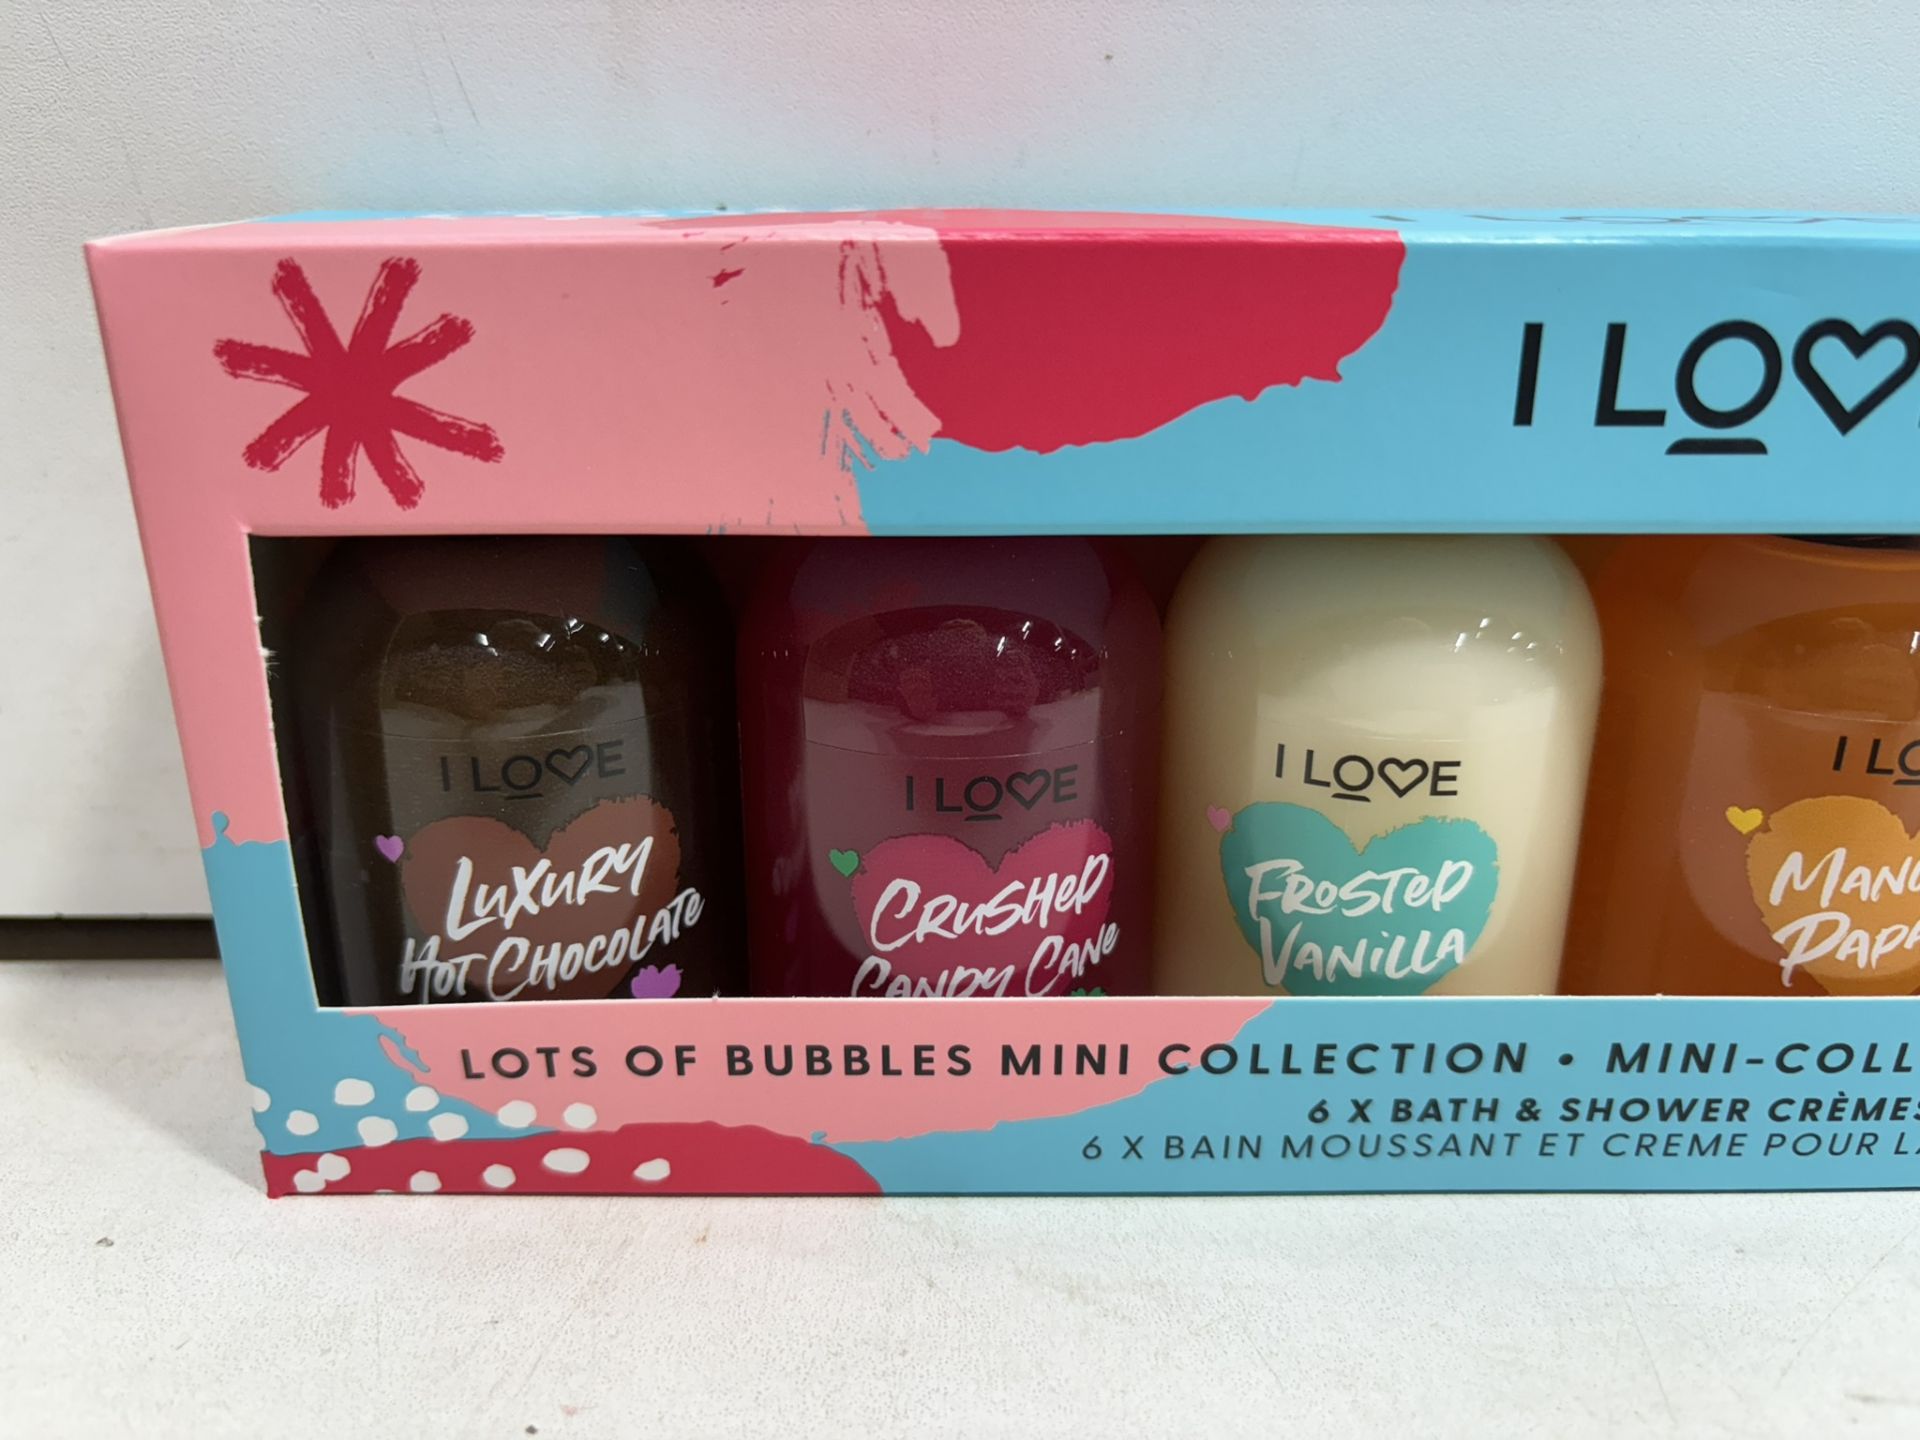 12 x I Love Cosmetics Lots of Bubbles Mini Collection gift boxes - Image 2 of 10